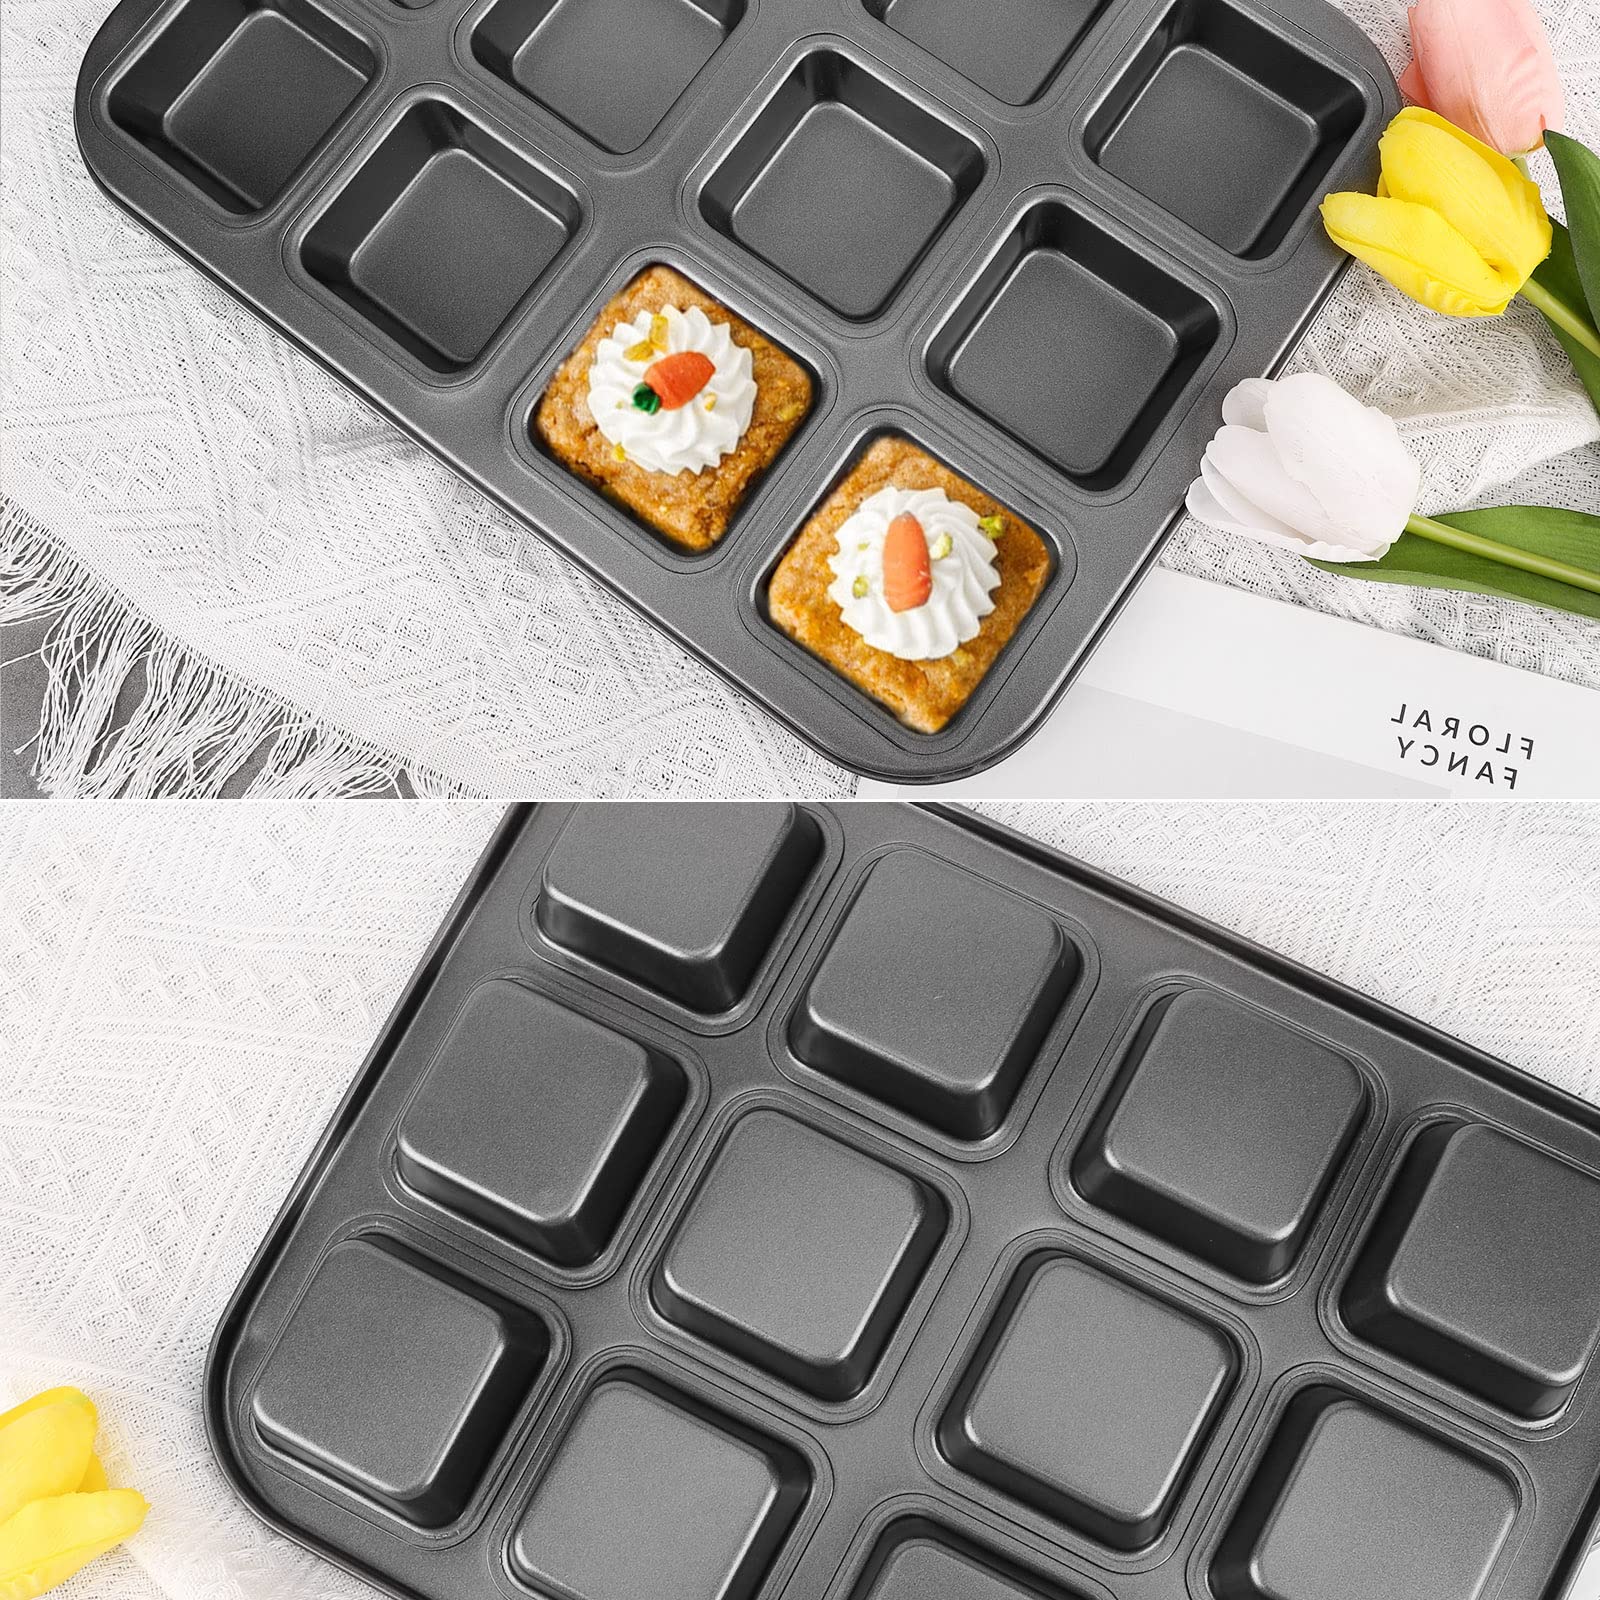 Beasea Brownie Pan with Dividers, 2 Set All Edges Square Cupcake Brownie Pans 12 Mini Cavity Non Stick Baking Carbon Steel Bread Mold Small Edge 3x4 Individual Cutter Sheet Tray for Cake Cookie Oven